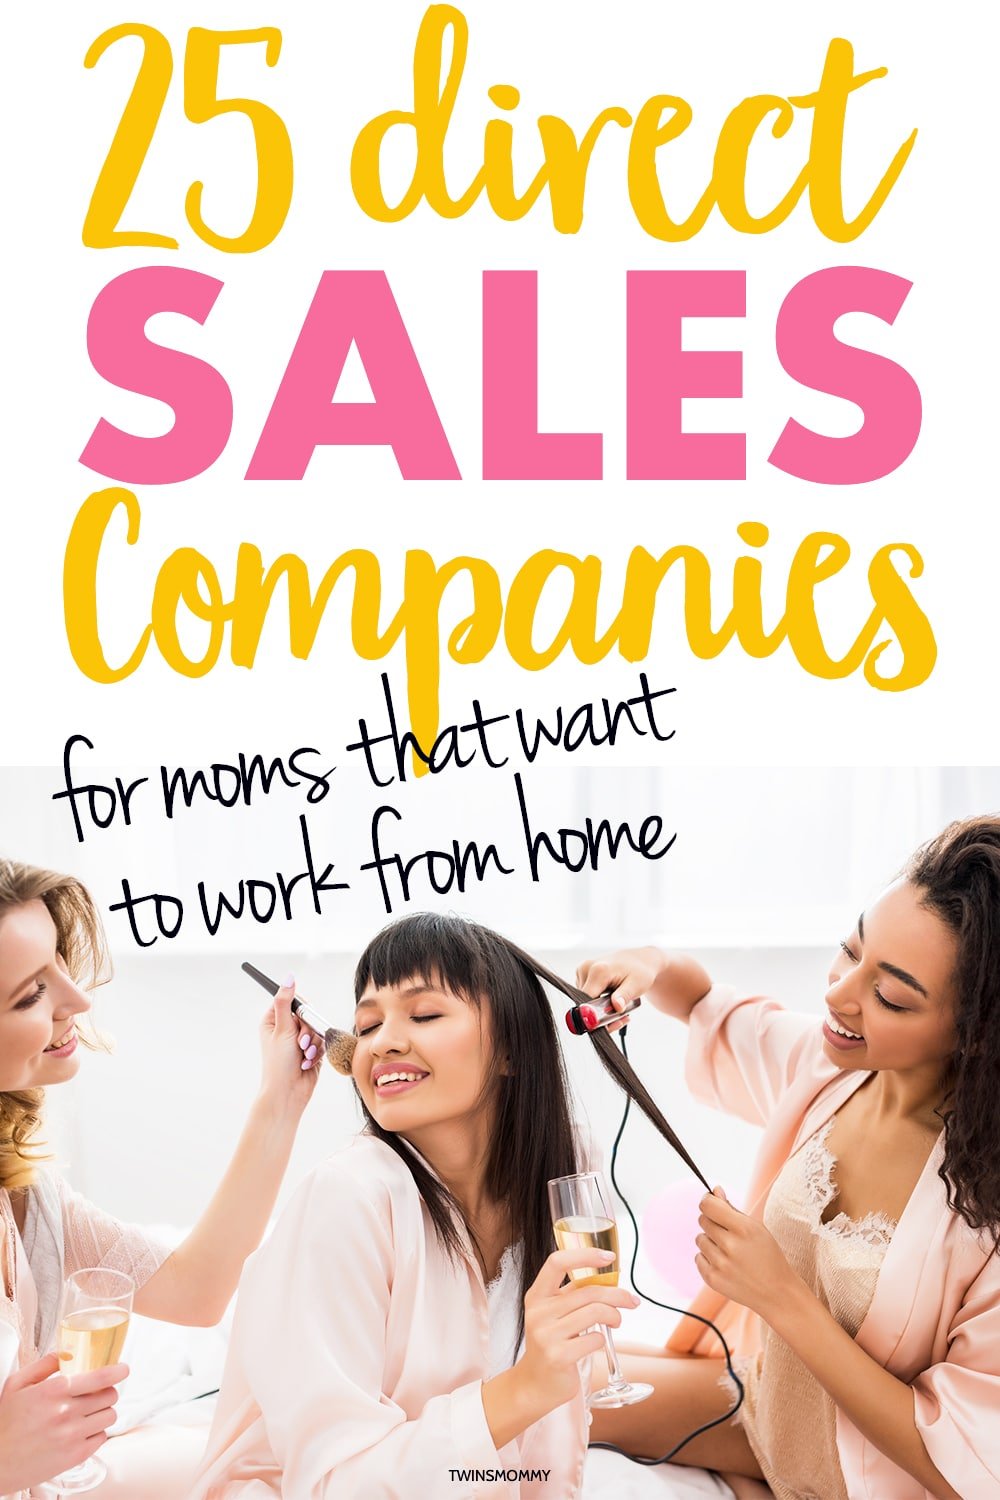 25 Direct Sales Companies for Moms Who Want to Work From Home Twins Mommy